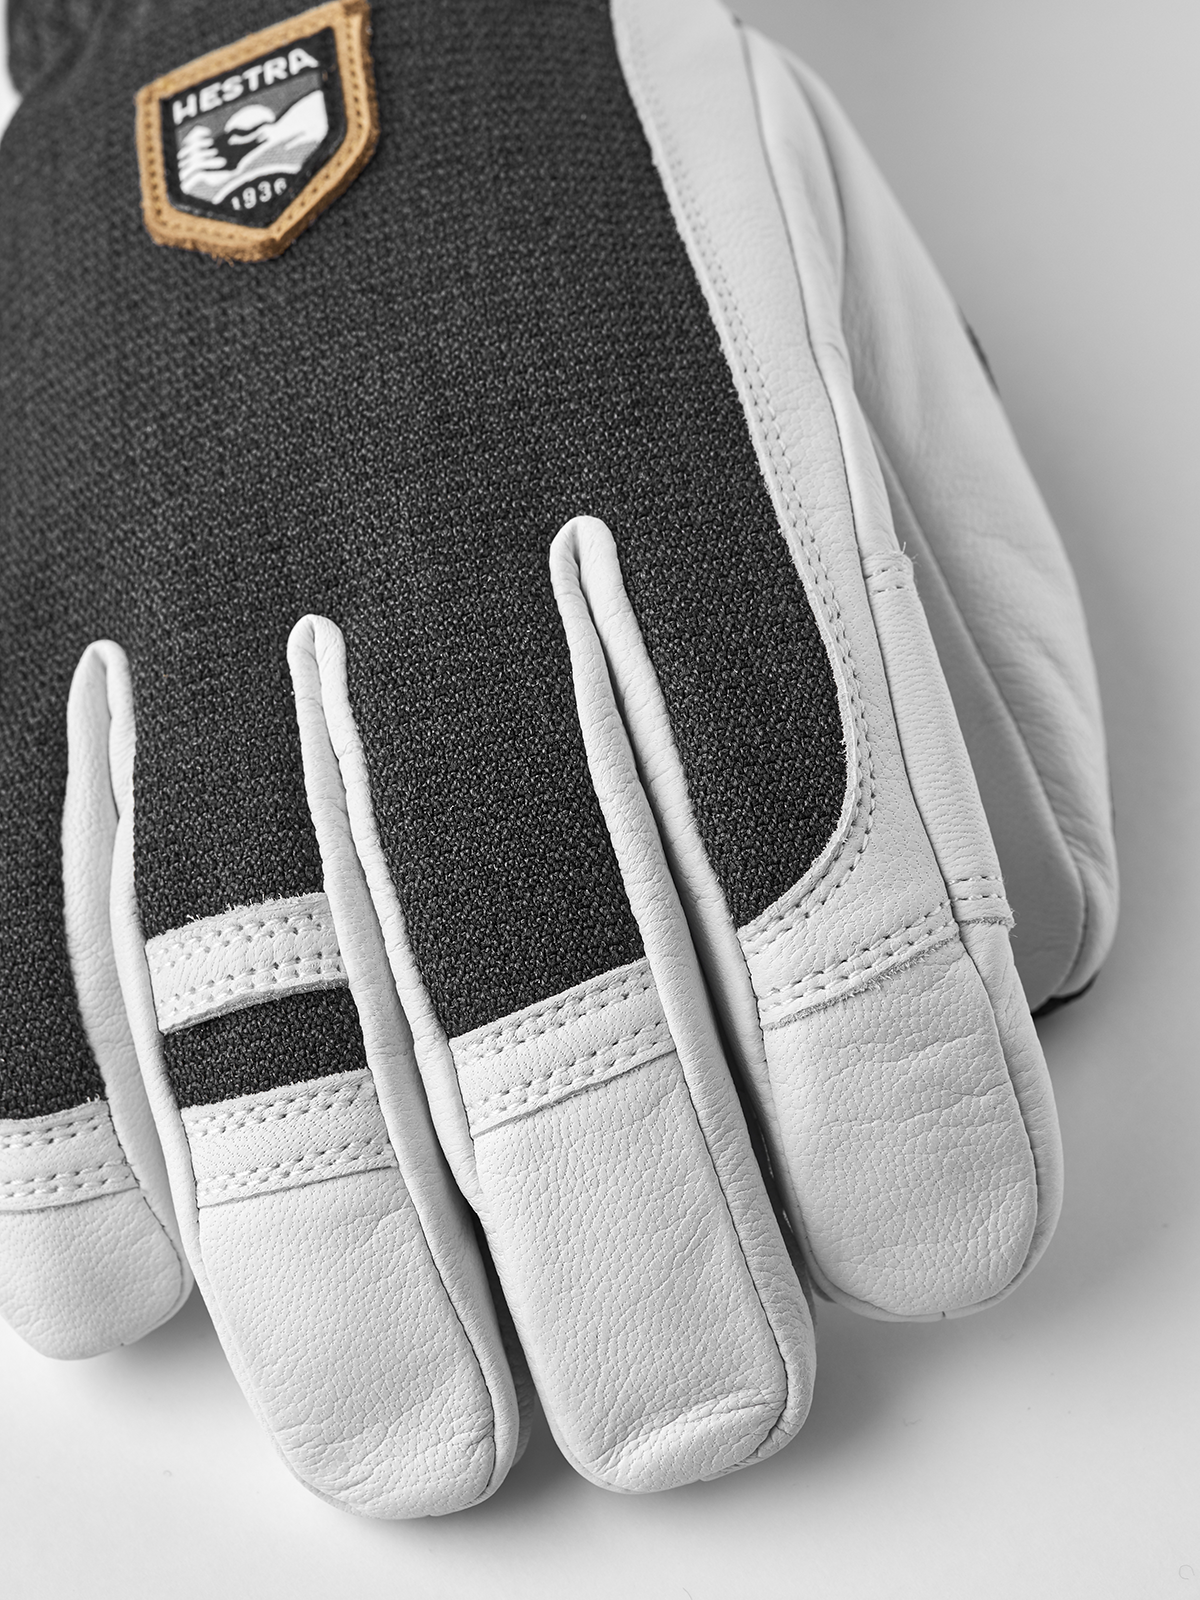 Army Leather Patrol 5-finger - Charcoal | Hestra Gloves